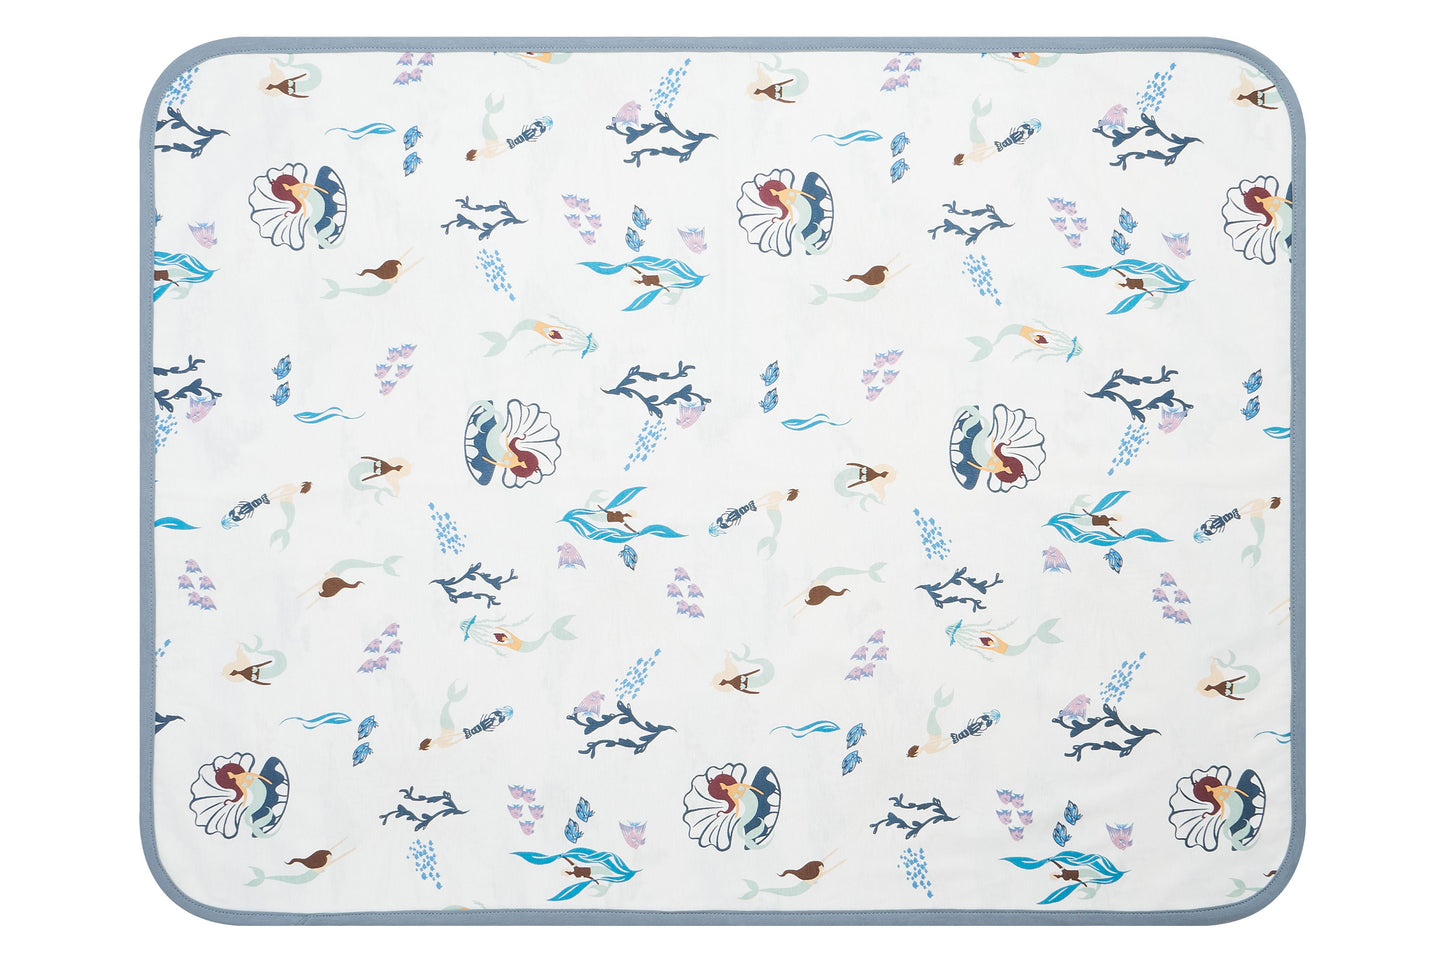 Waterproof Change Pad (Cotton, Small) - Under the Sea